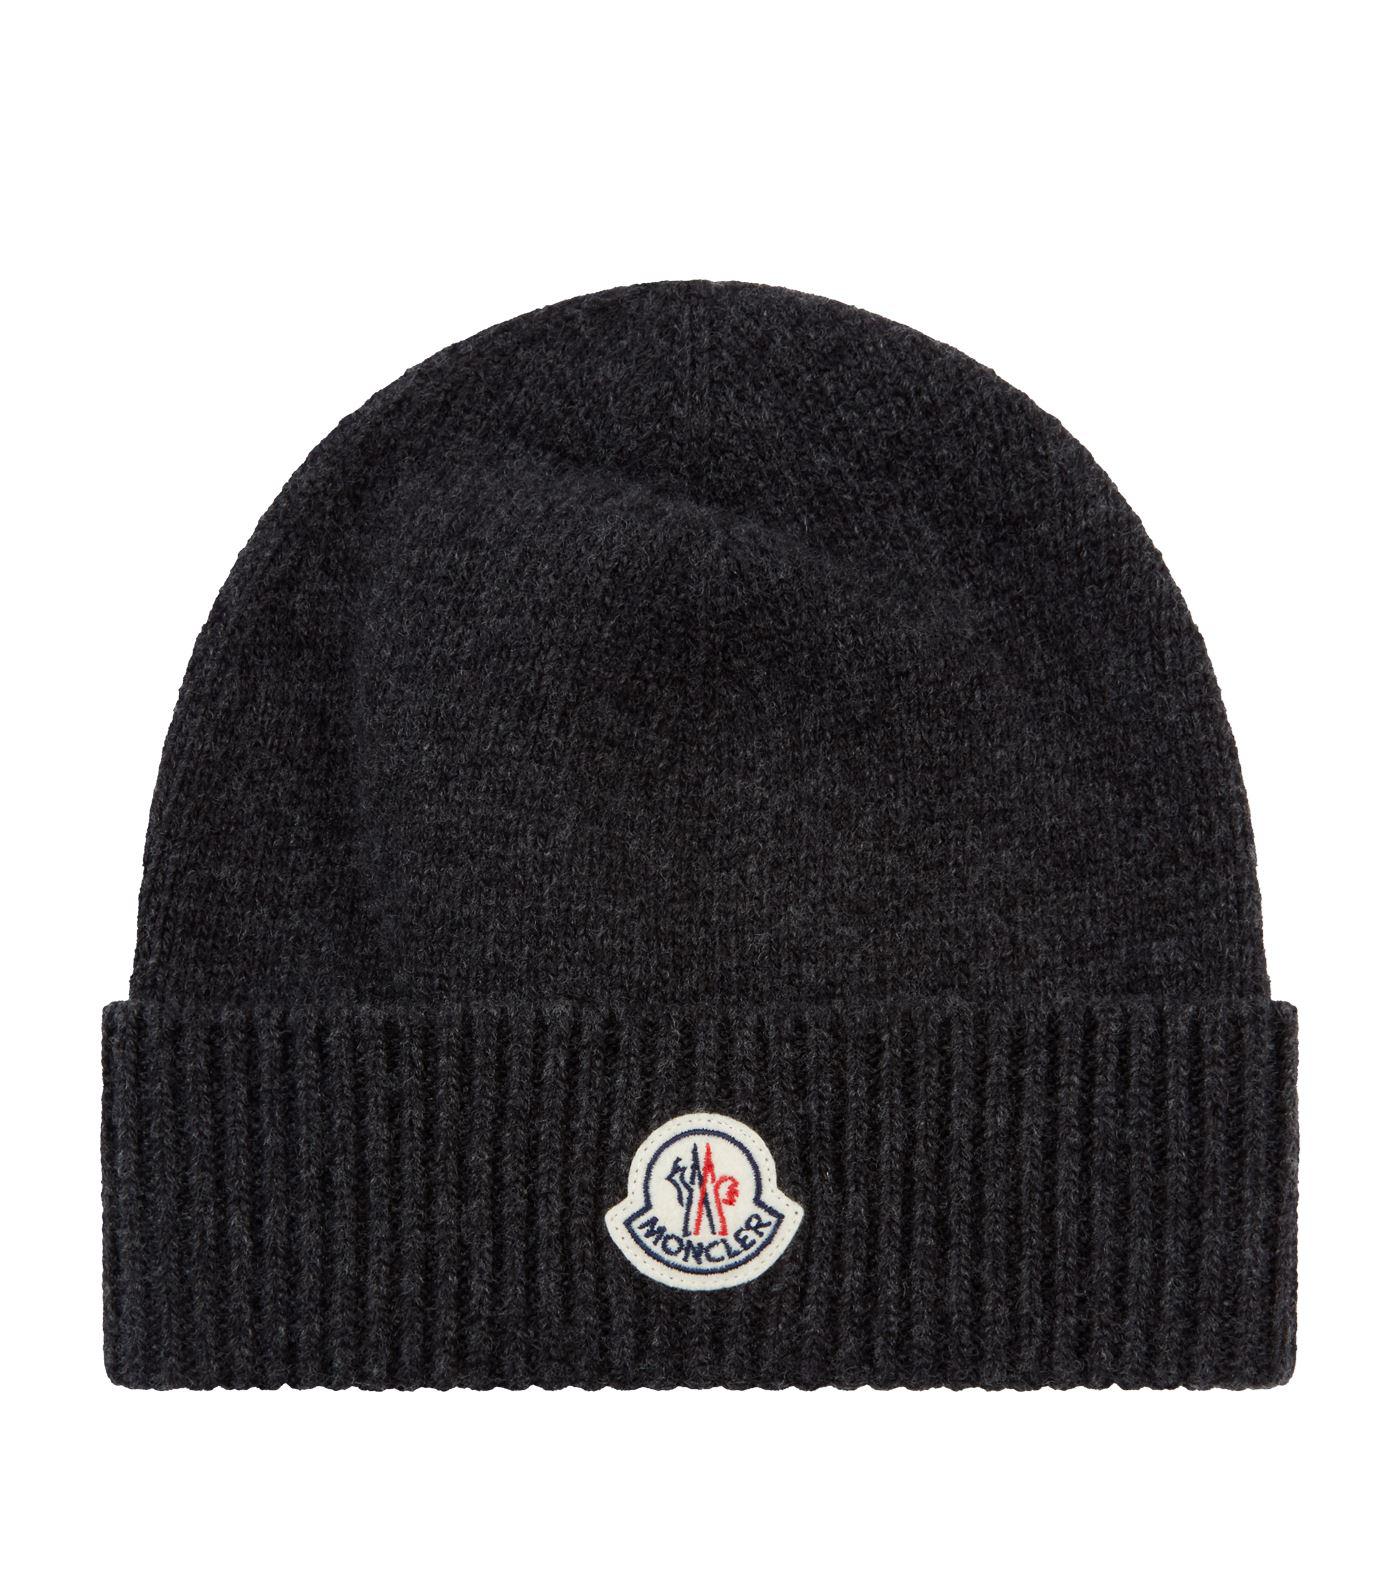 Moncler Ribbed Wool Beanie in Grey (Gray) for Men - Lyst